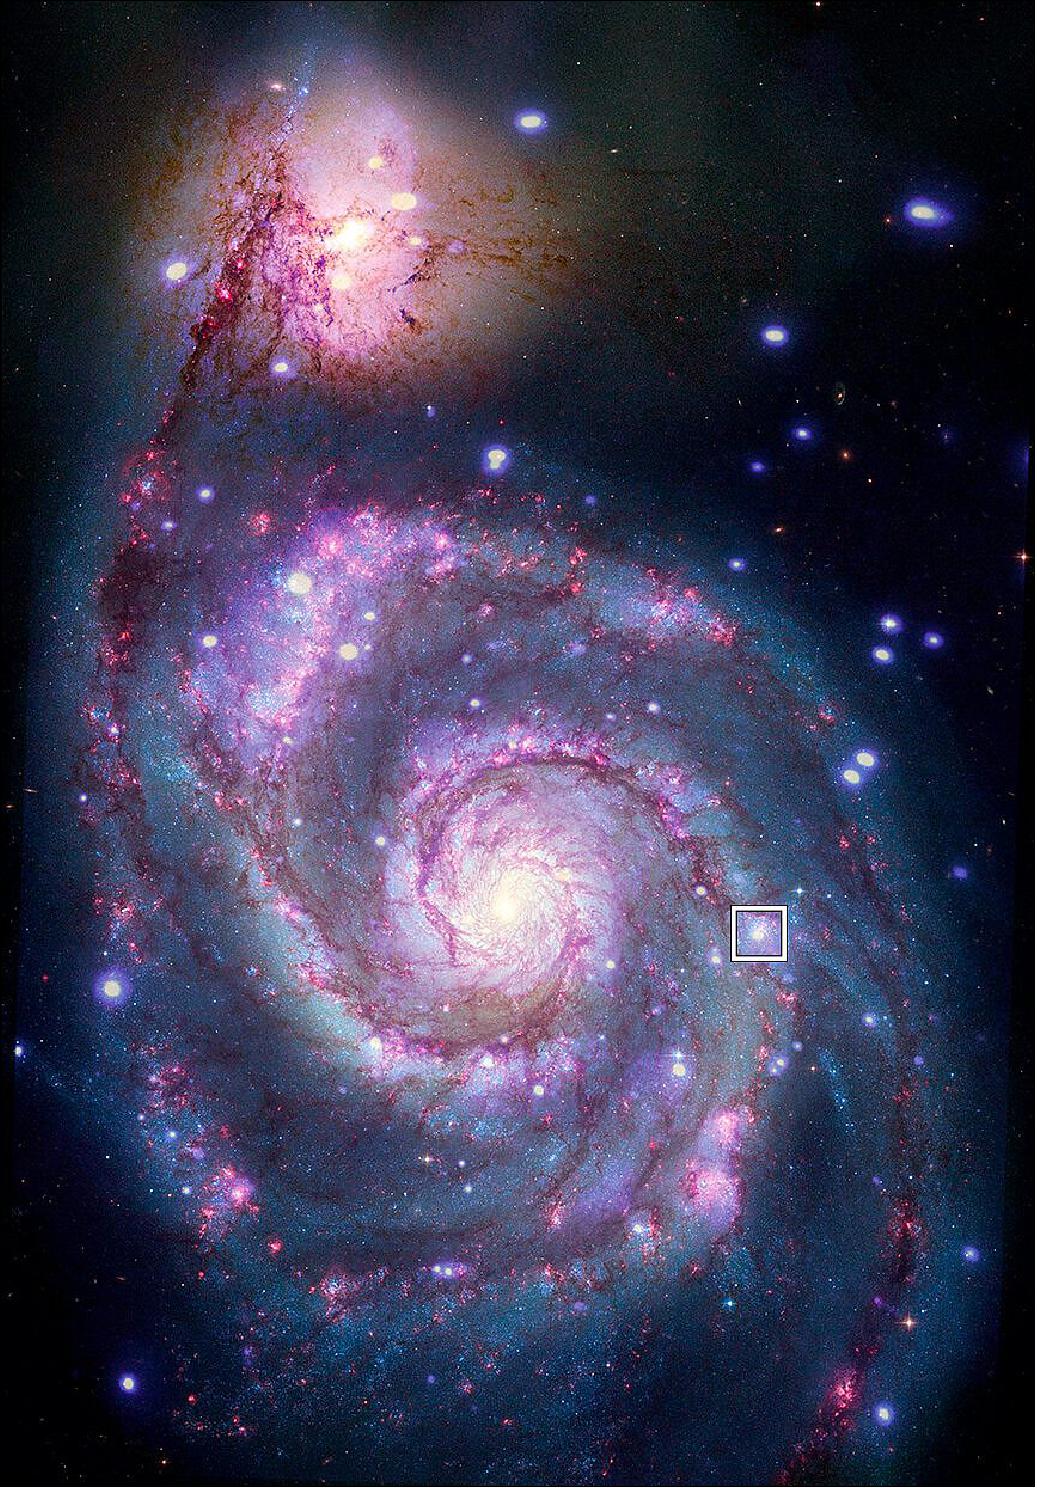 Figure 19: Location of possible planet in M51. A composite image of M51 with X-rays from NASA's Chandra and optical light from the NASA/ESA Hubble Space Telescope contains a box that marks the location of the possible planet candidate (image credit: X-ray: NASA/CXC/SAO/R. DiStefano, et al.; Optical: NASA/ESA/STScI/Grendler)